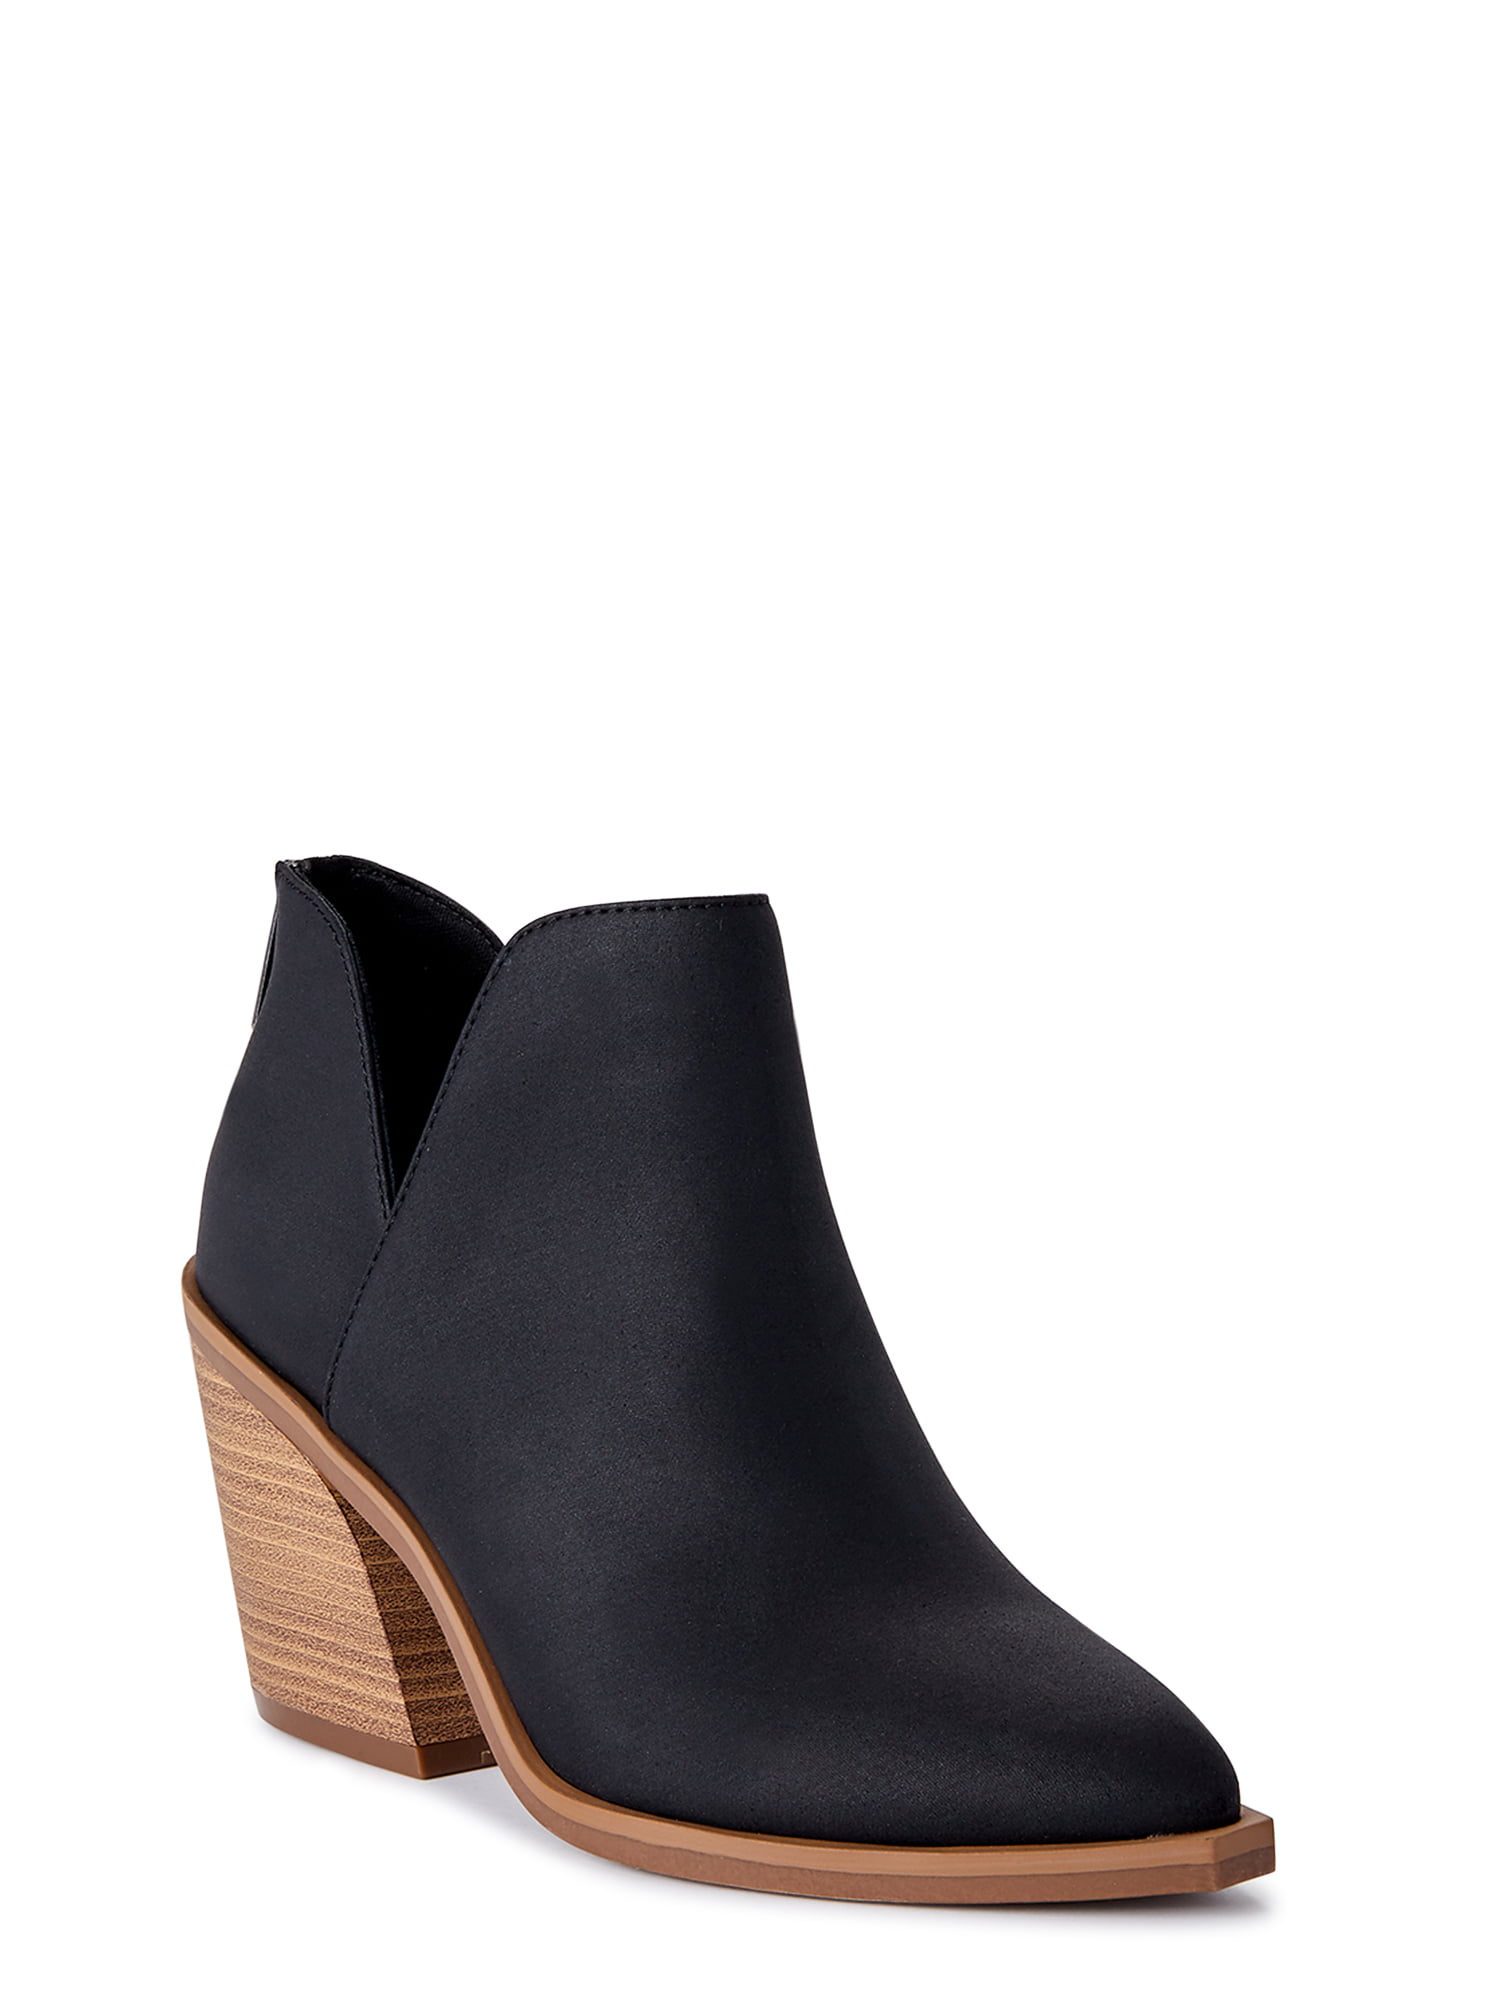 Time and Tru Women's Heeled Cut Out Ankle Boots - Walmart.com